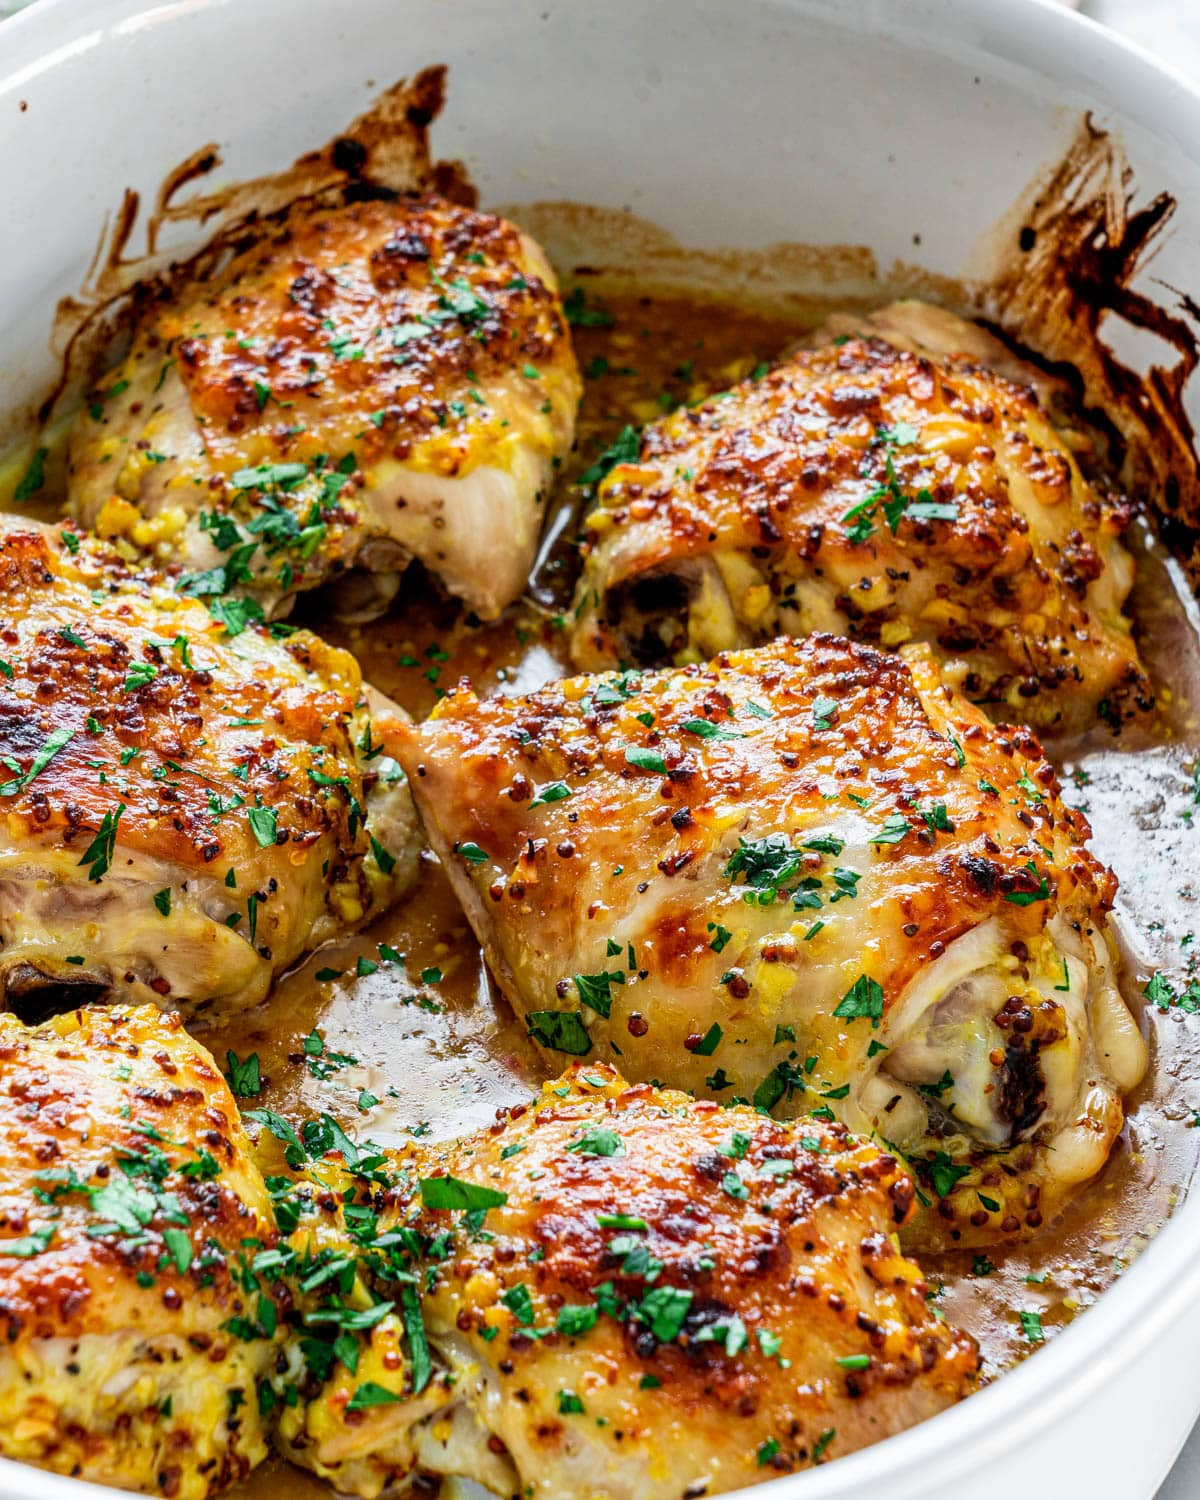 Baking Chicken Thighs In Oven Inspirational Oven Baked Chicken Thighs Jo Cooks